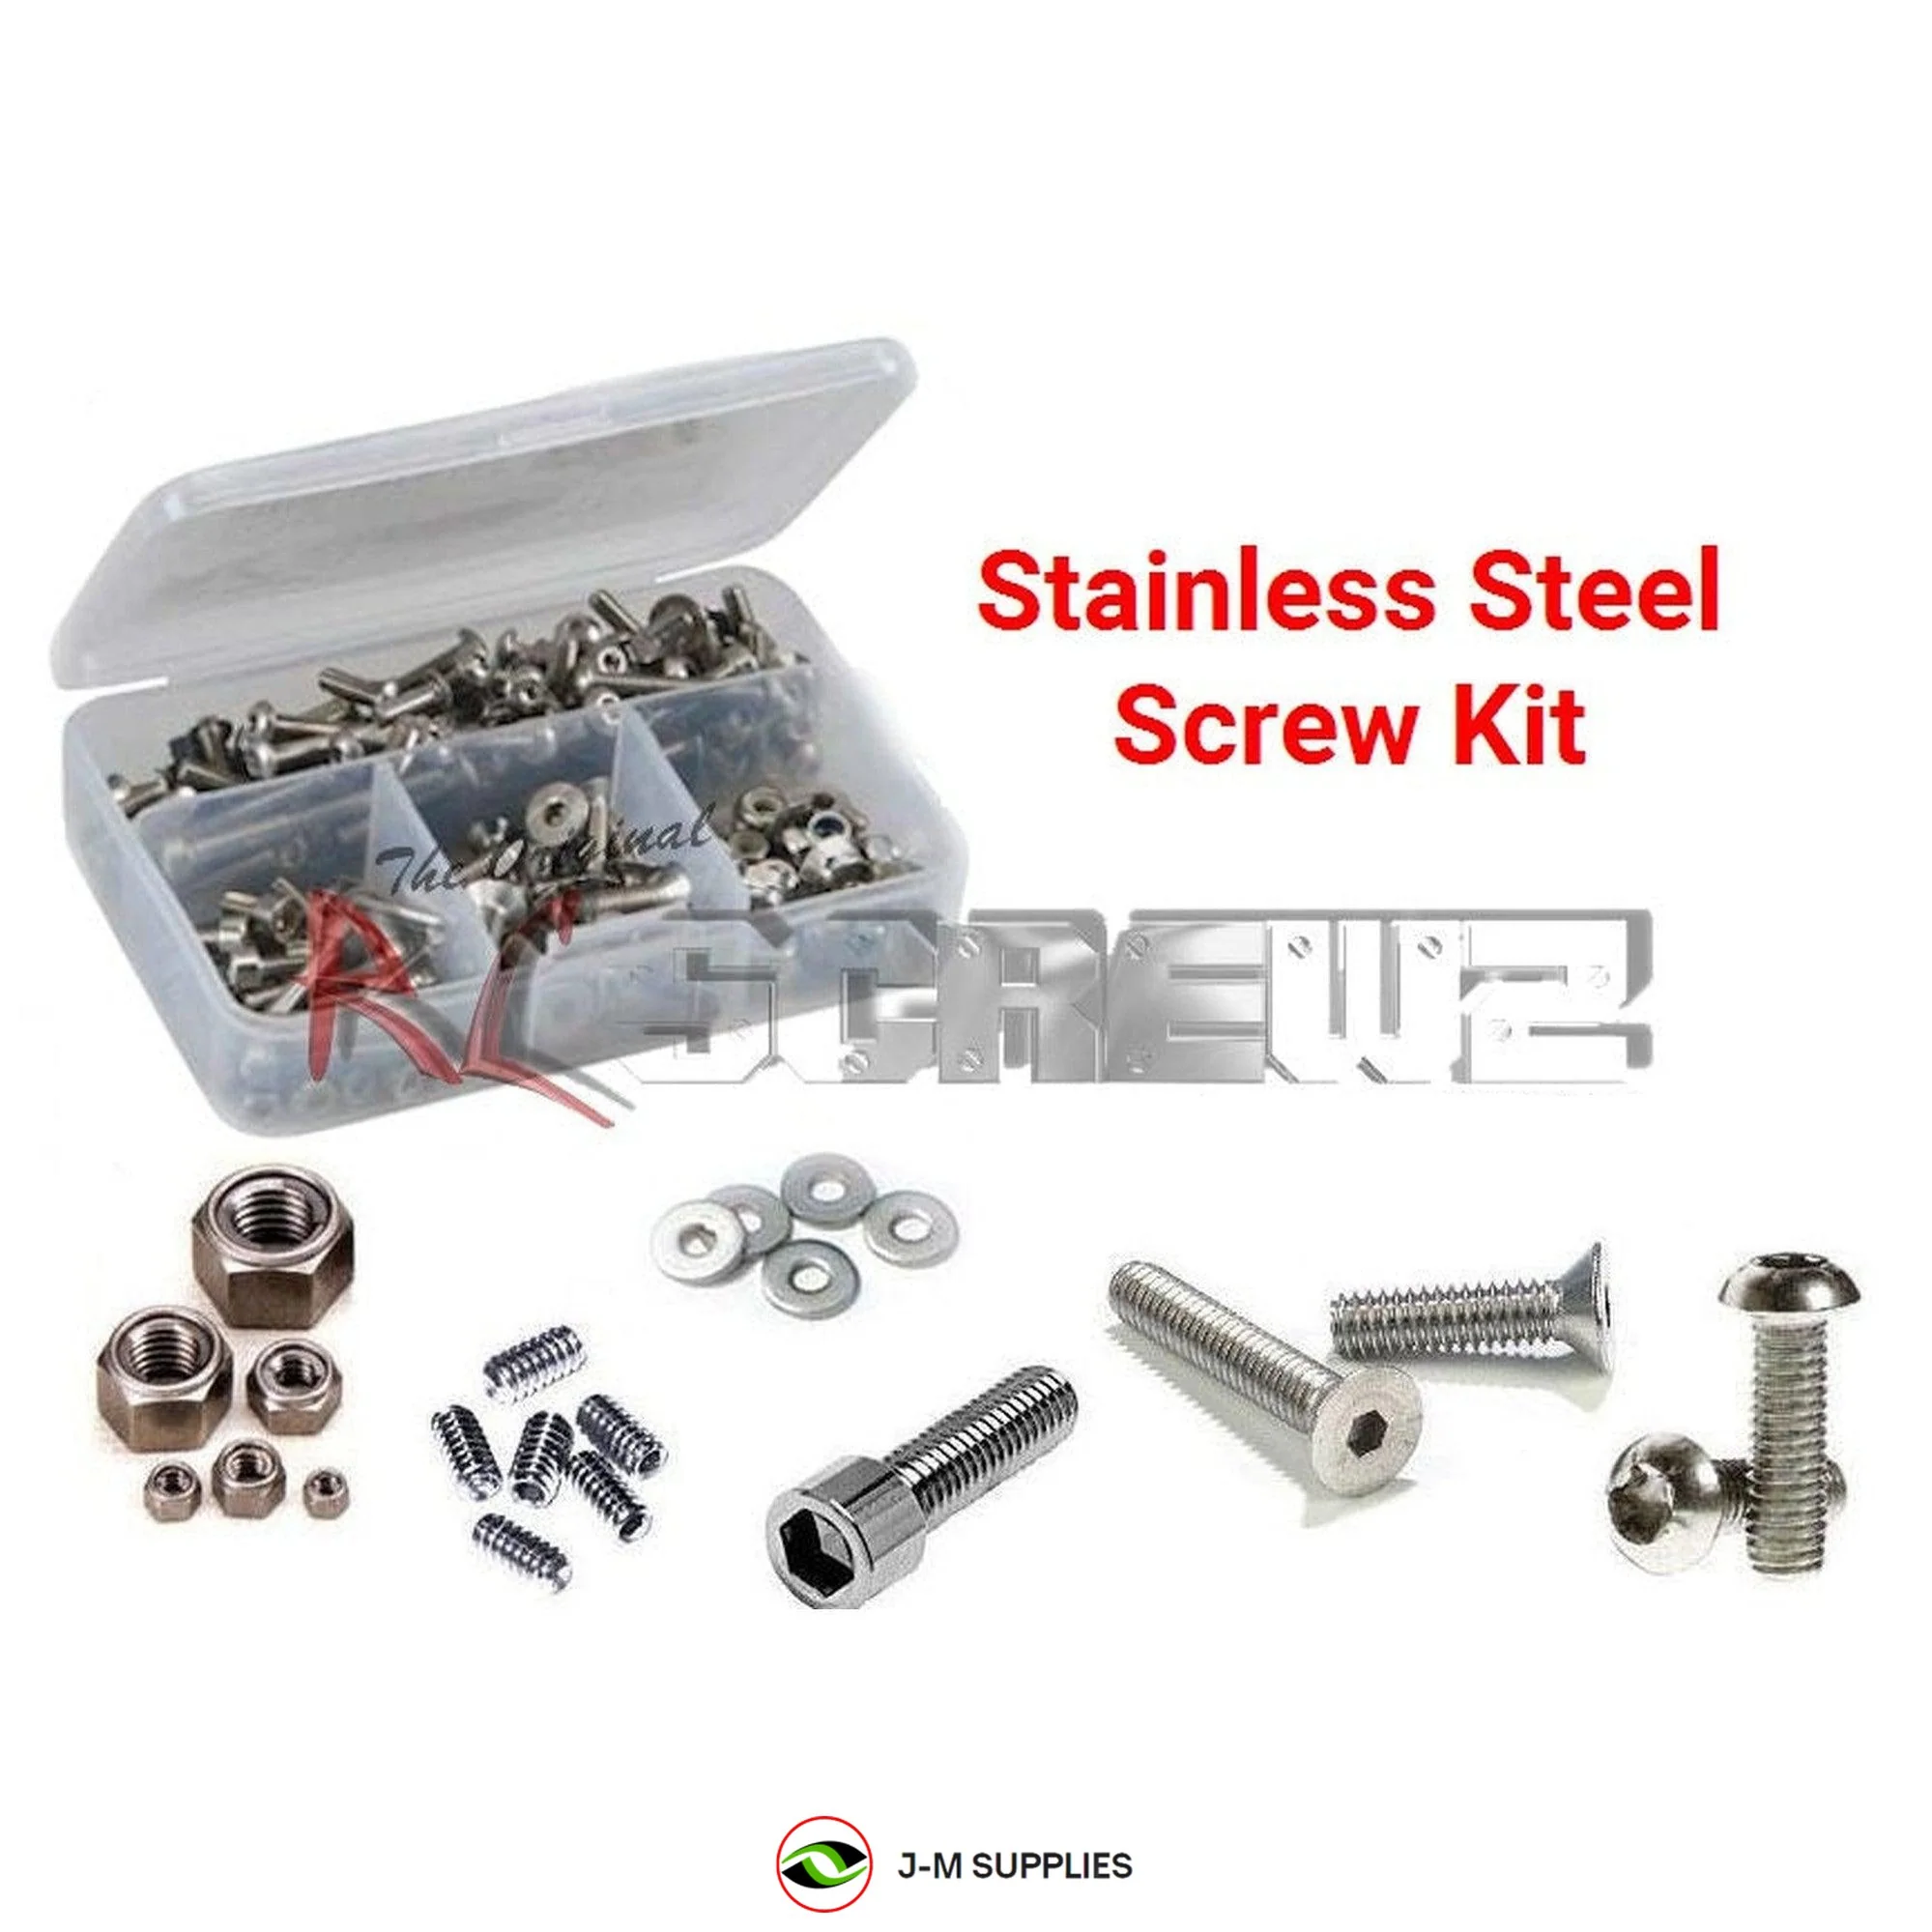 RCScrewZ Stainless Steel Screw Kit czr024 for Cross RC MC-8C #CZR90100043 - Picture 1 of 12